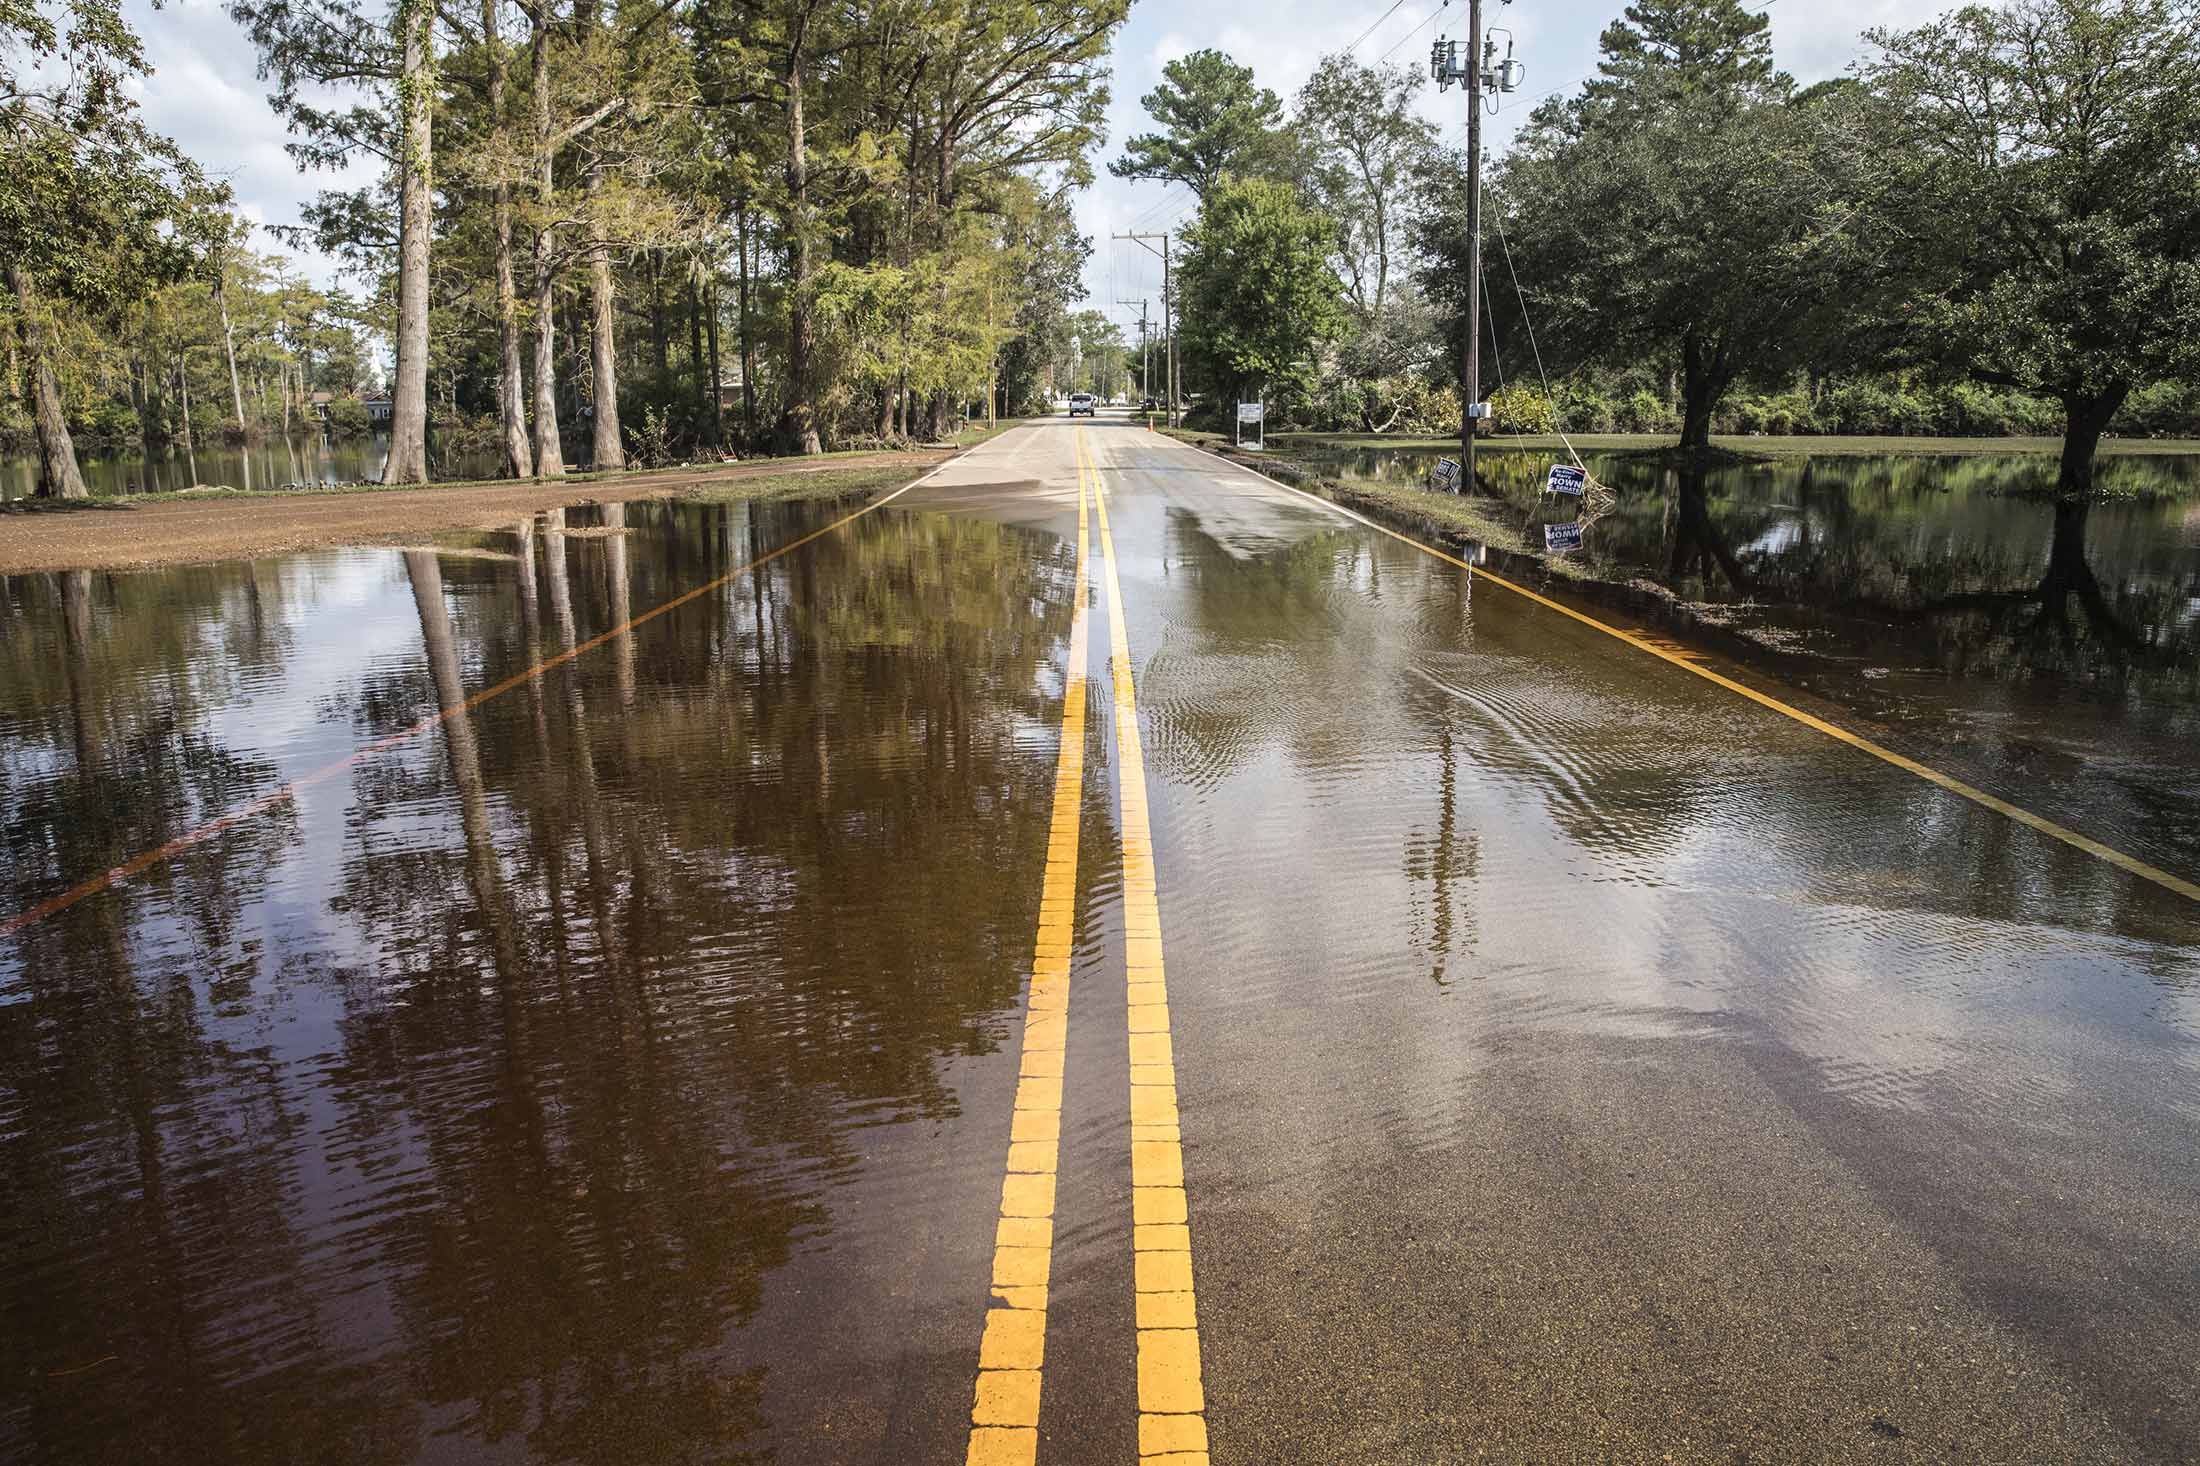 The aftermath of Hurricane Florence in Trenton, N.C., on Sept. 20, 2018.